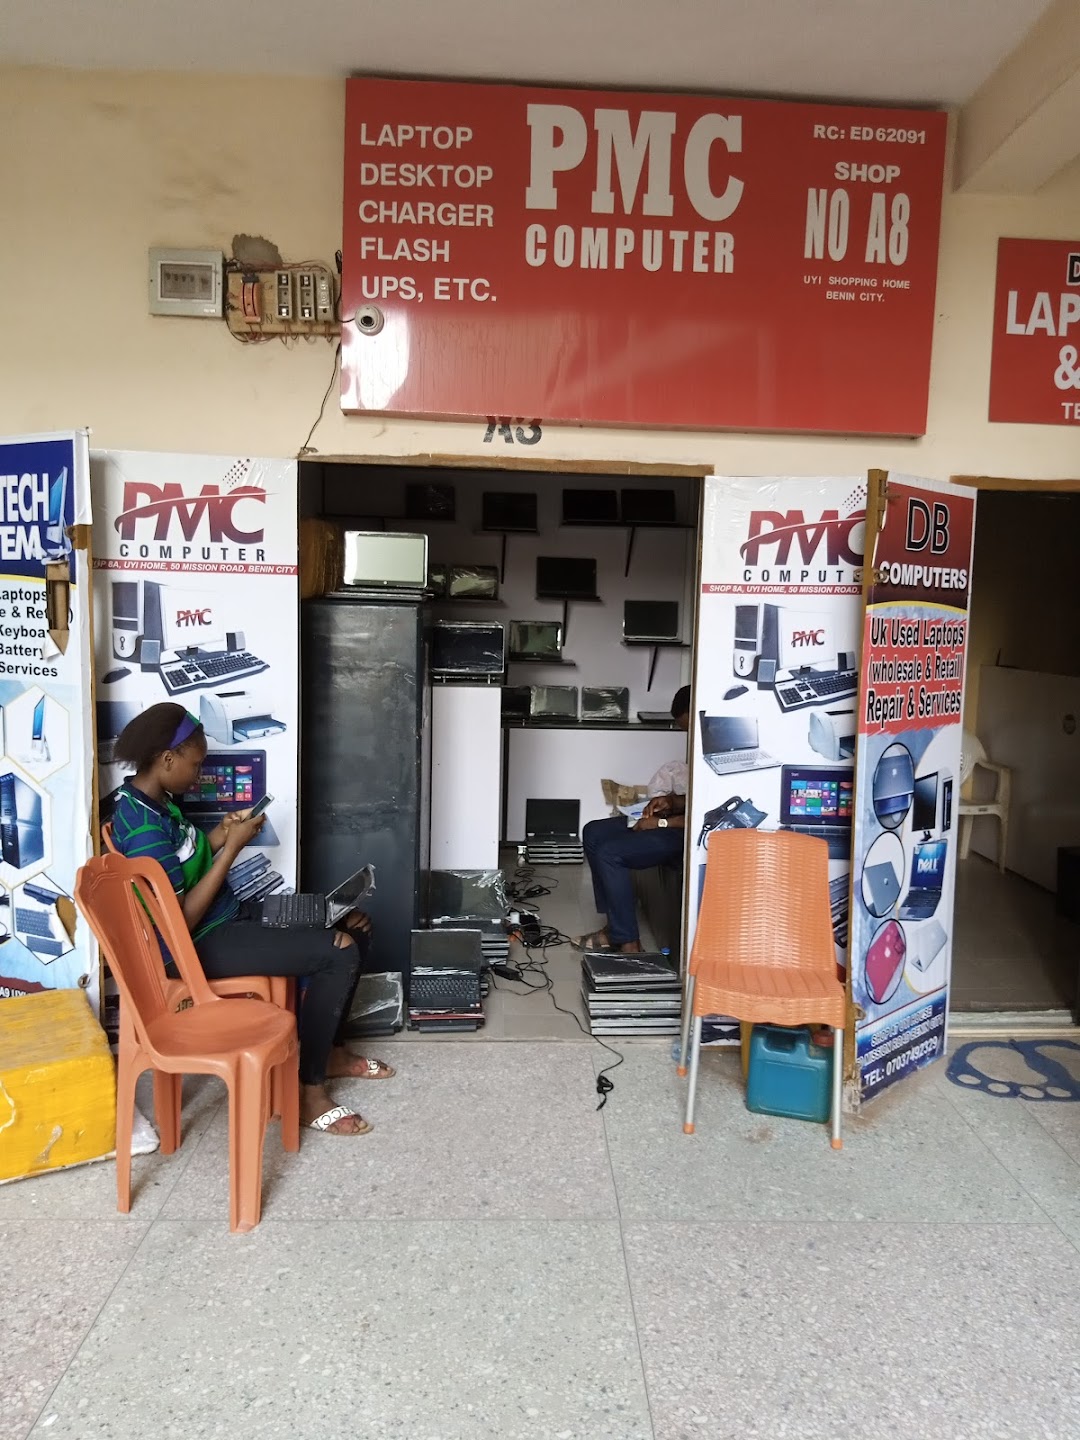 Pmc computer (Mission road branch)